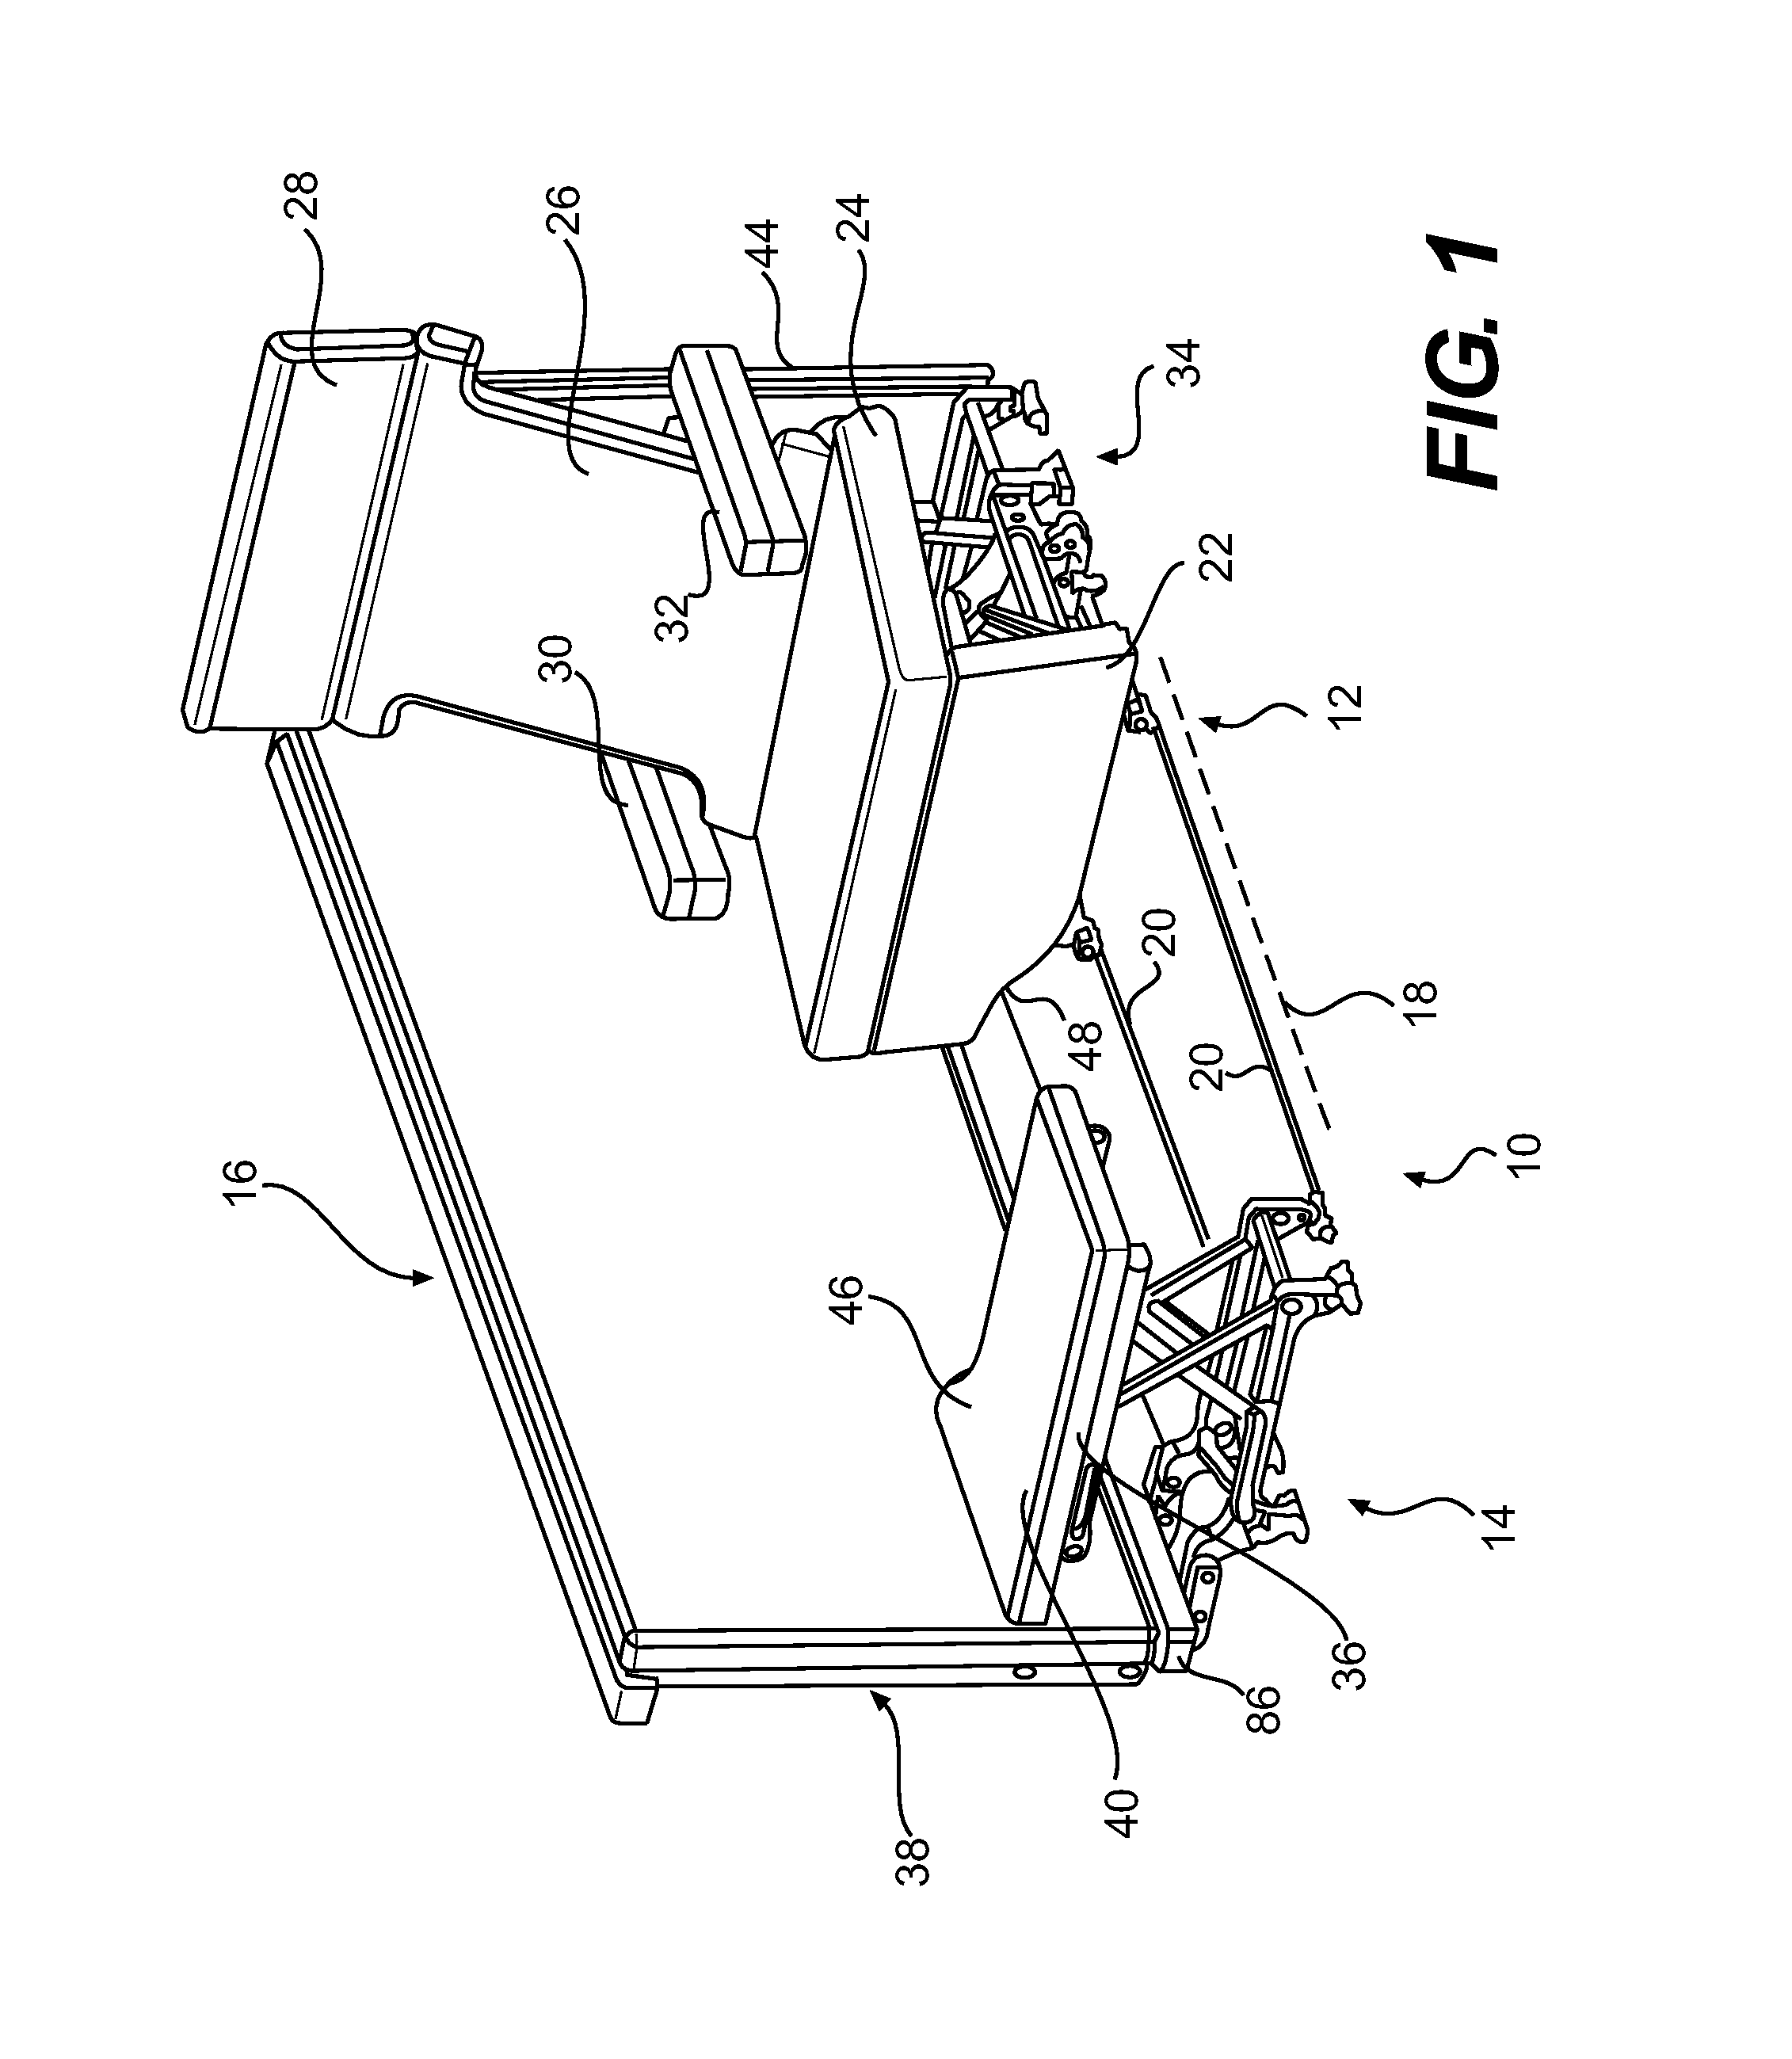 Seating arrangement convertible to a bunk bed